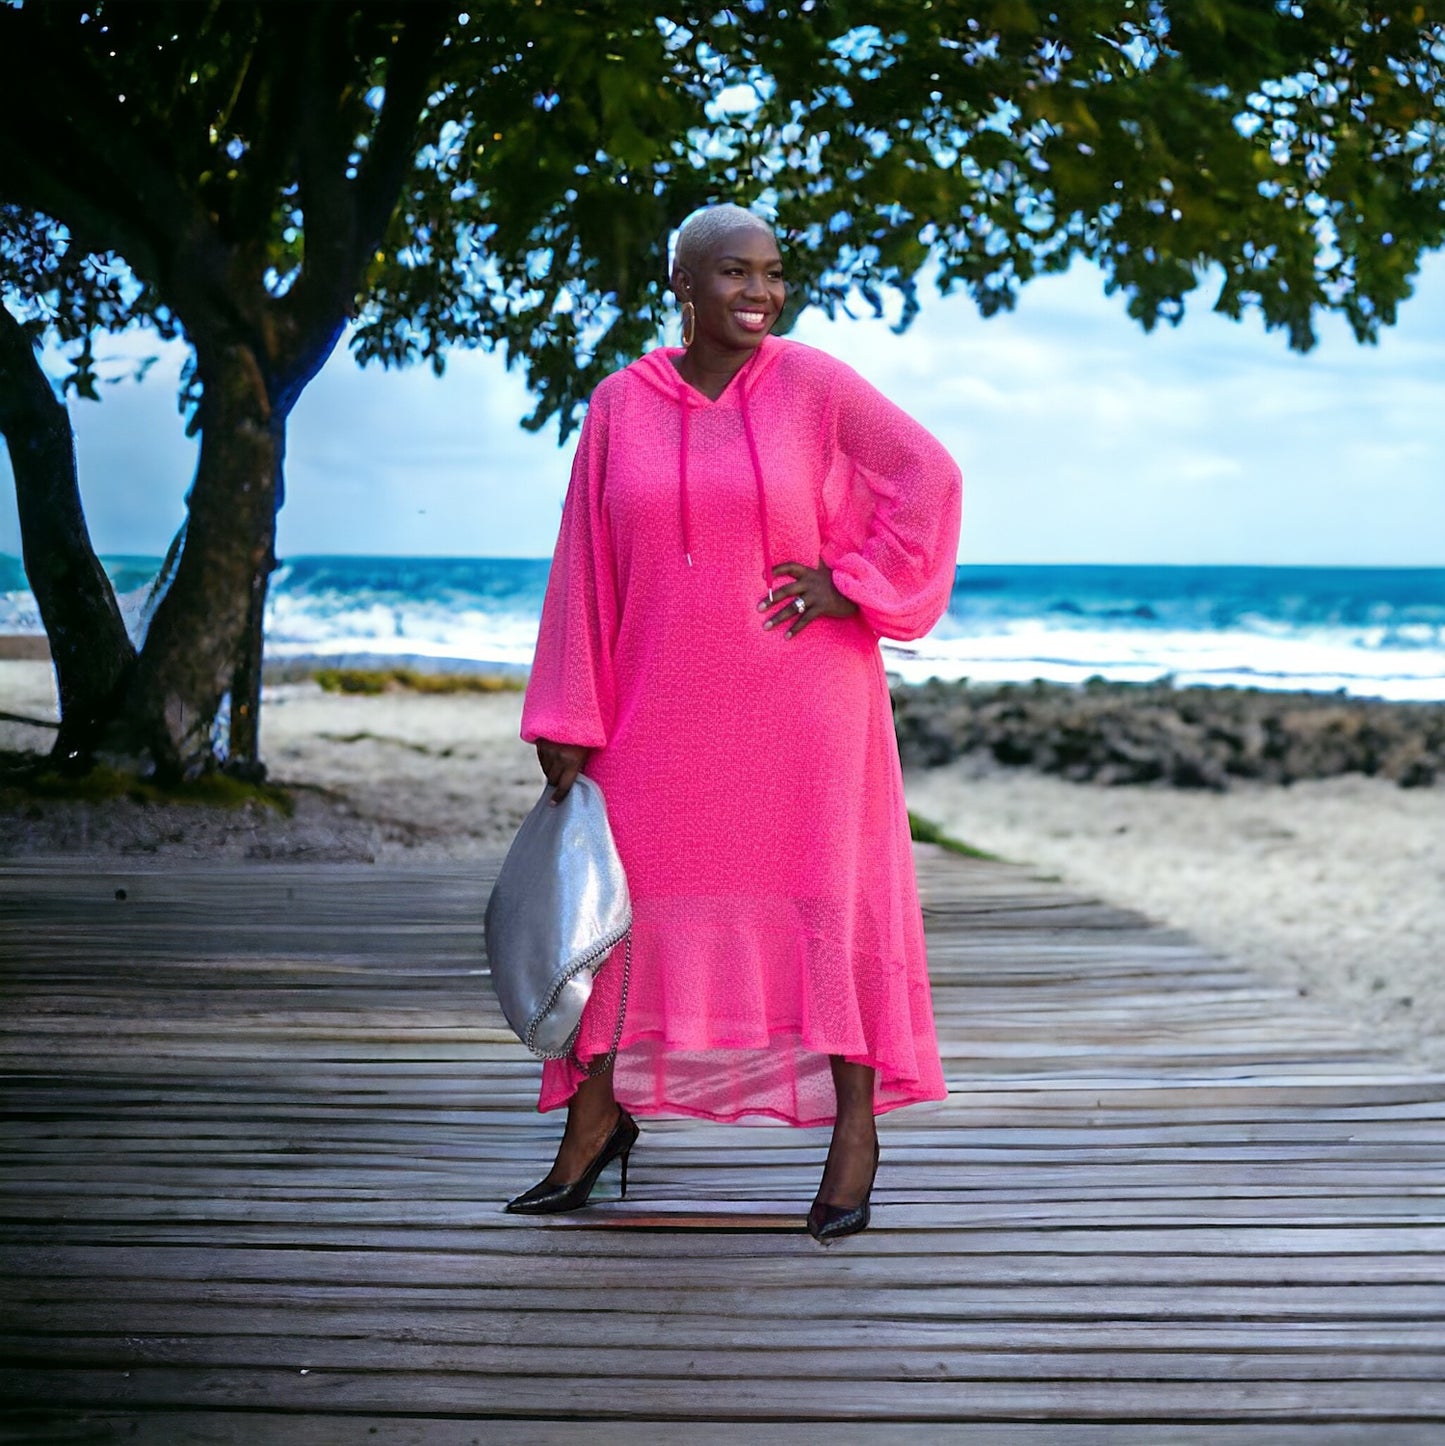 Women's Plus Size Aphrodite Hot Pink Holiday Resort Dress with hoodie and hot pink undergarment, paired with a silver handbag and black heels for a chic beach look.